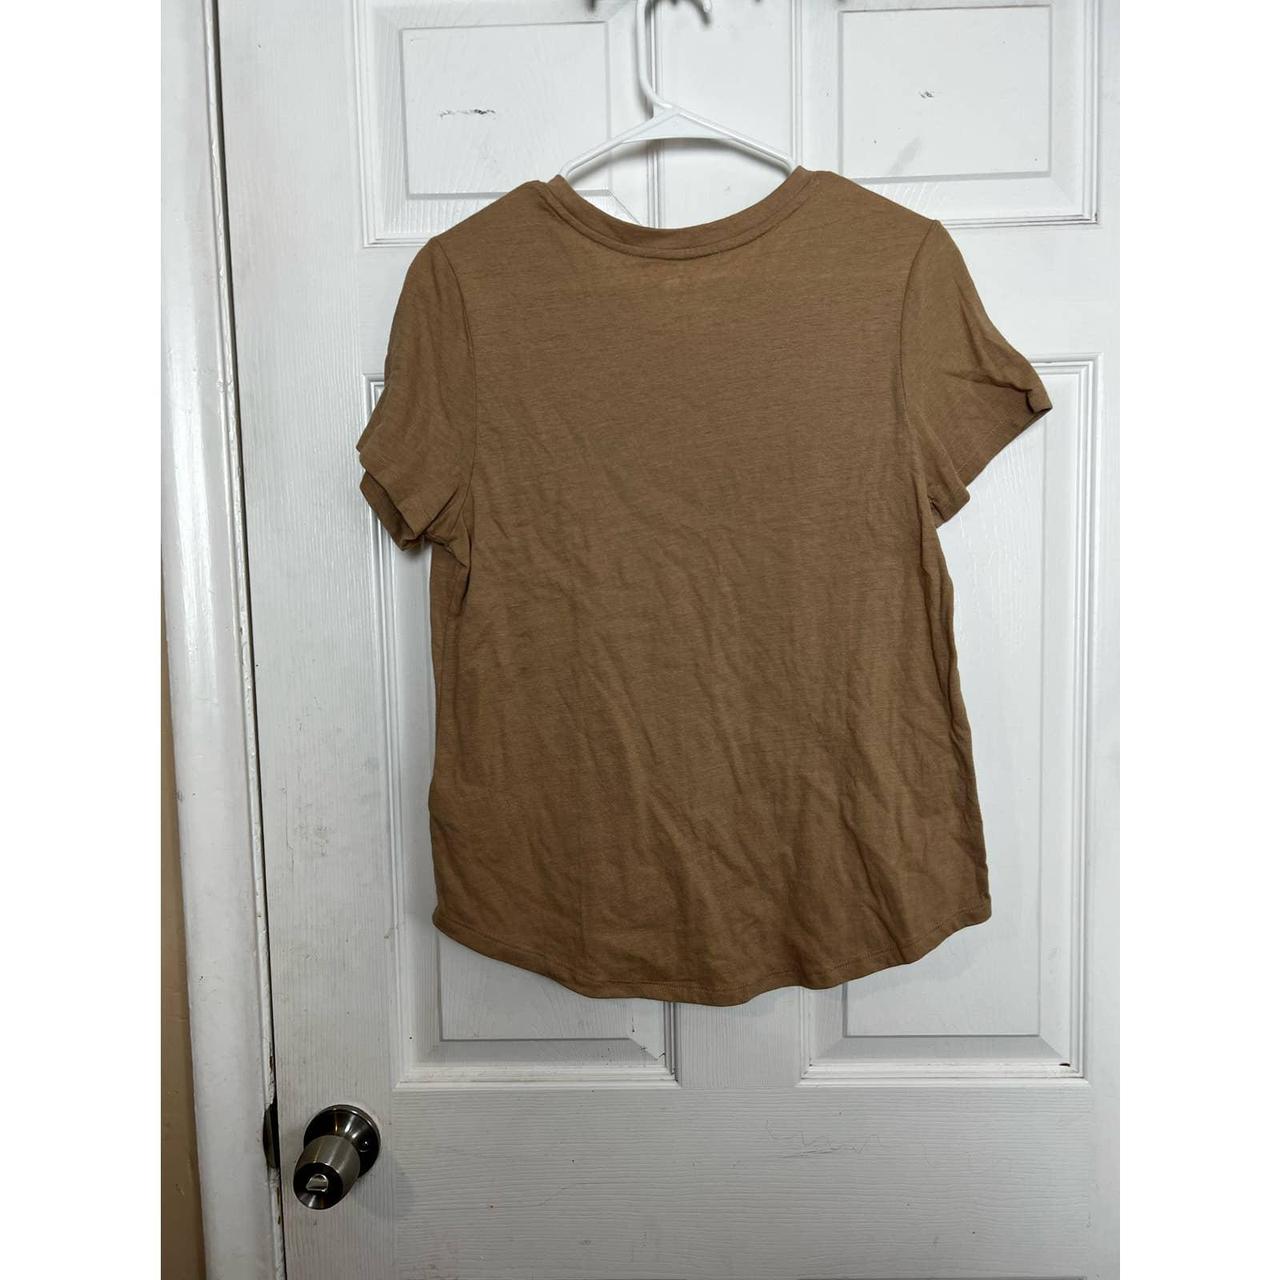 Product Image 2 - Women's Brown Old Navy Graphic